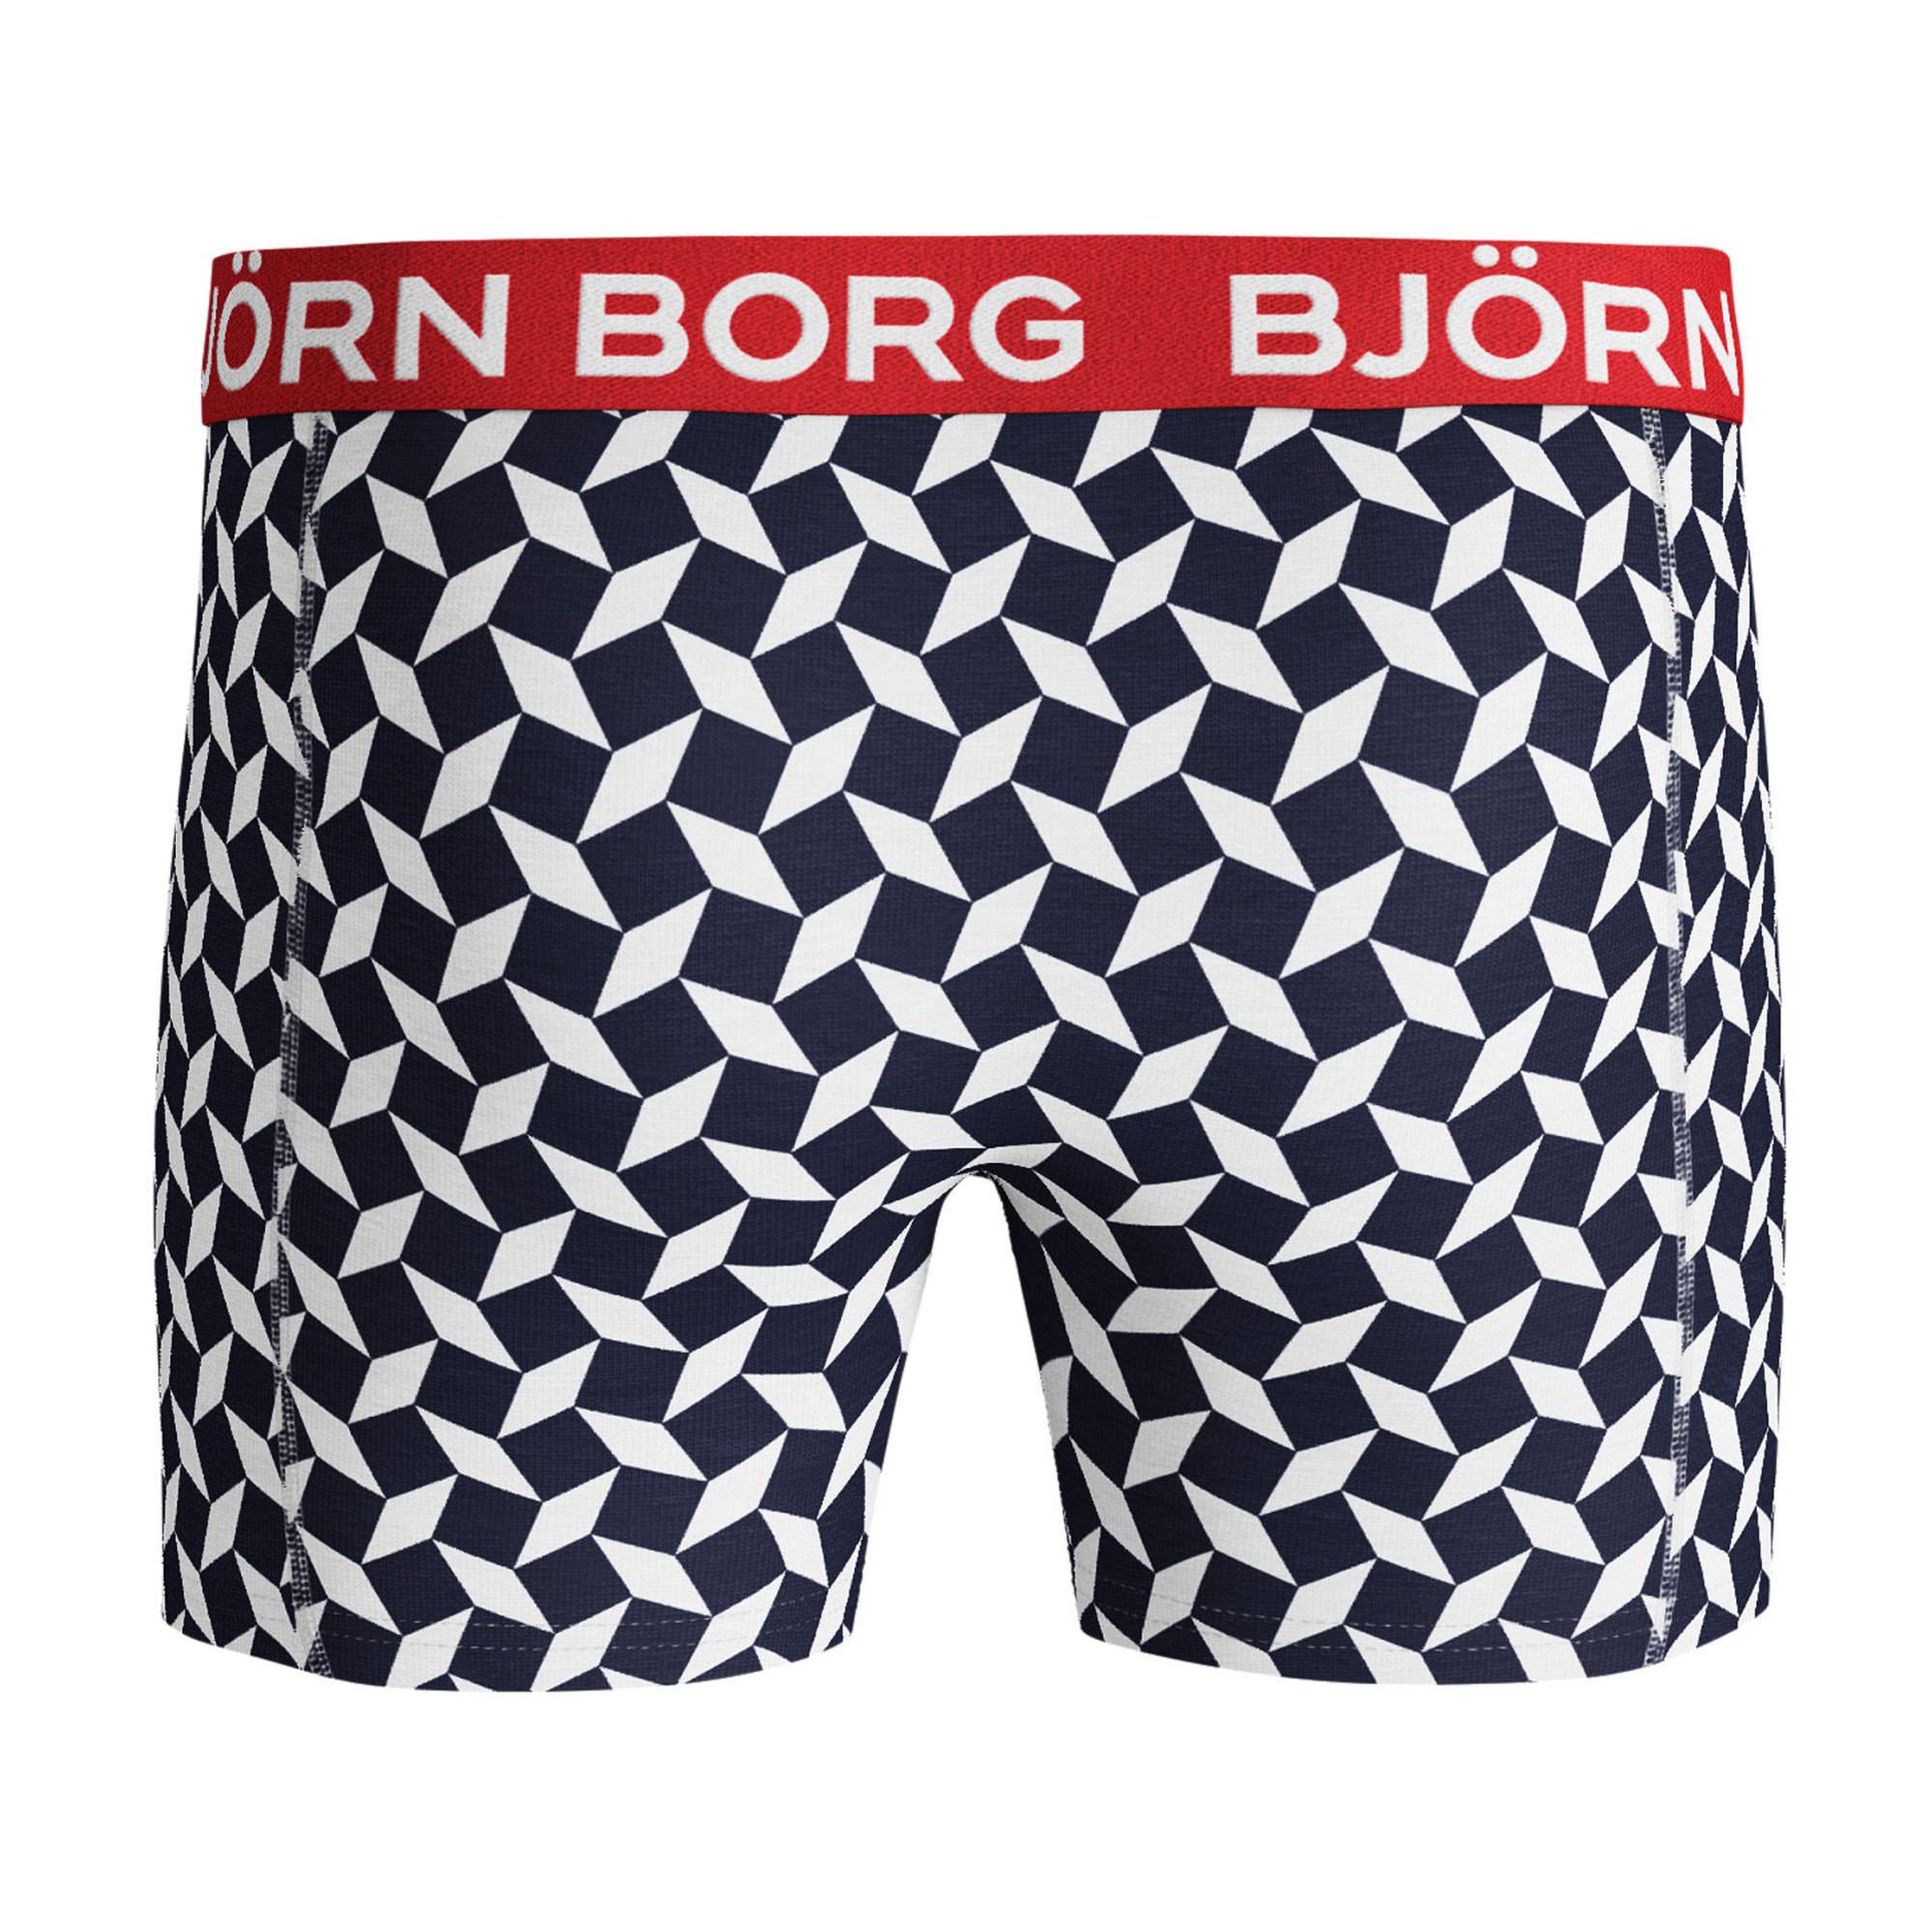 Two-Piece Square Print Boxers